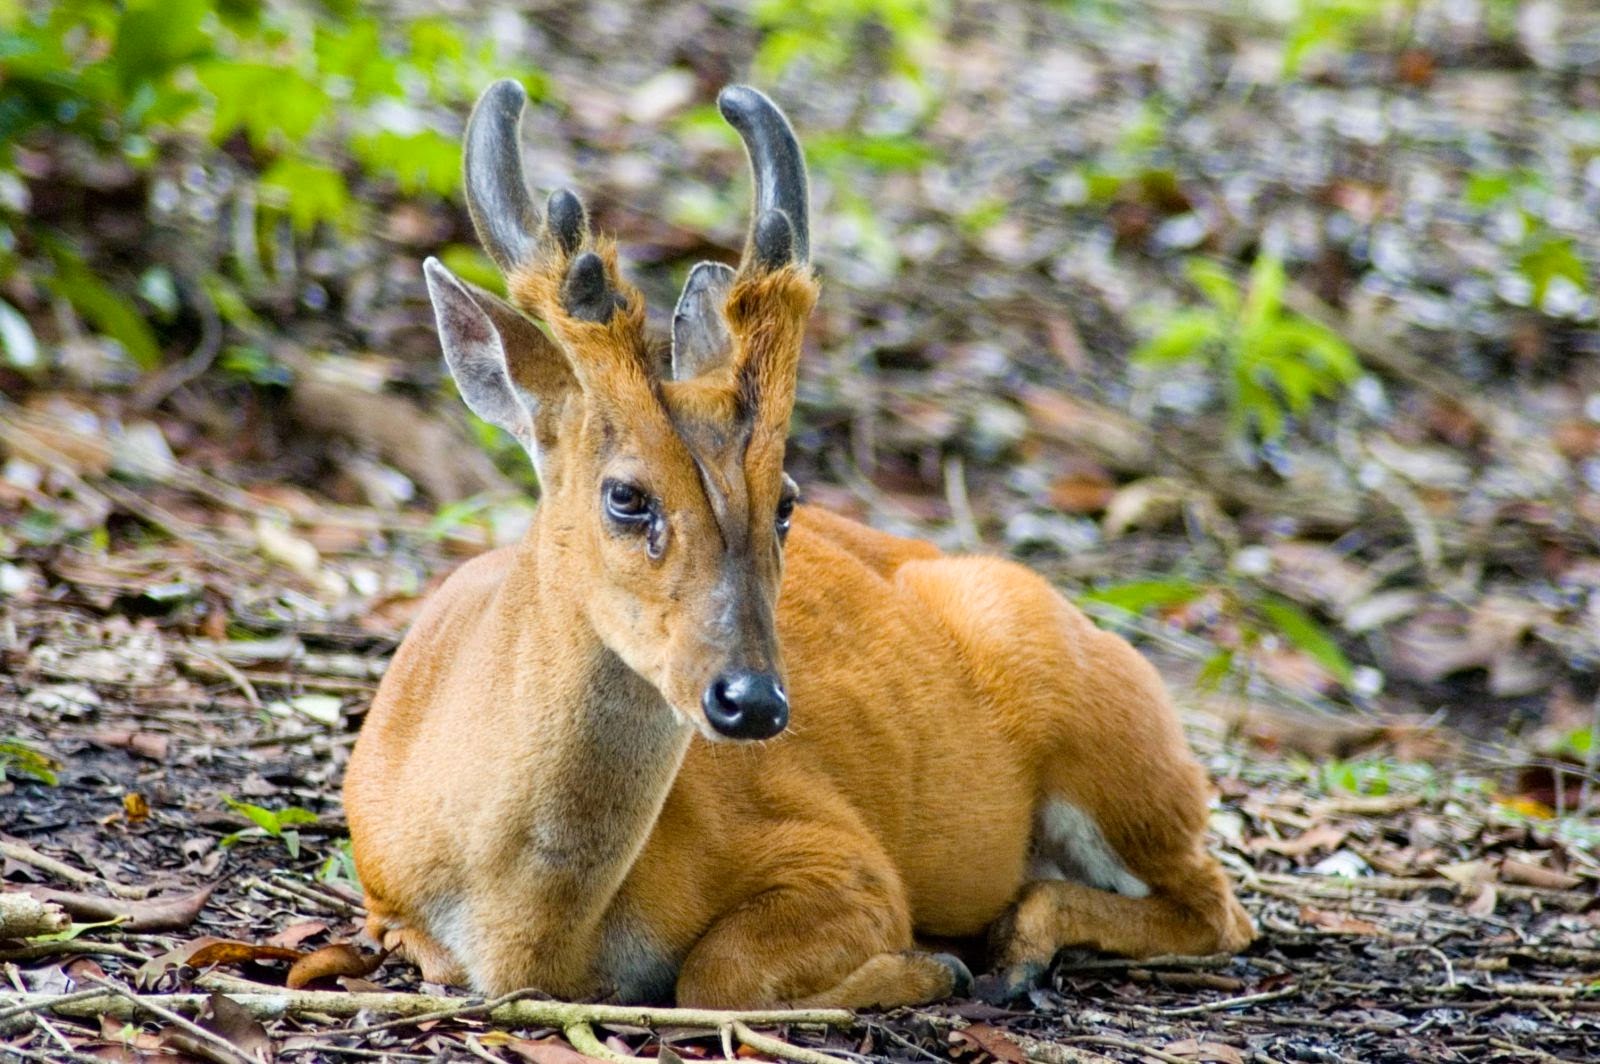 Animals You May Not Have Known Existed - Southern Red Muntjac